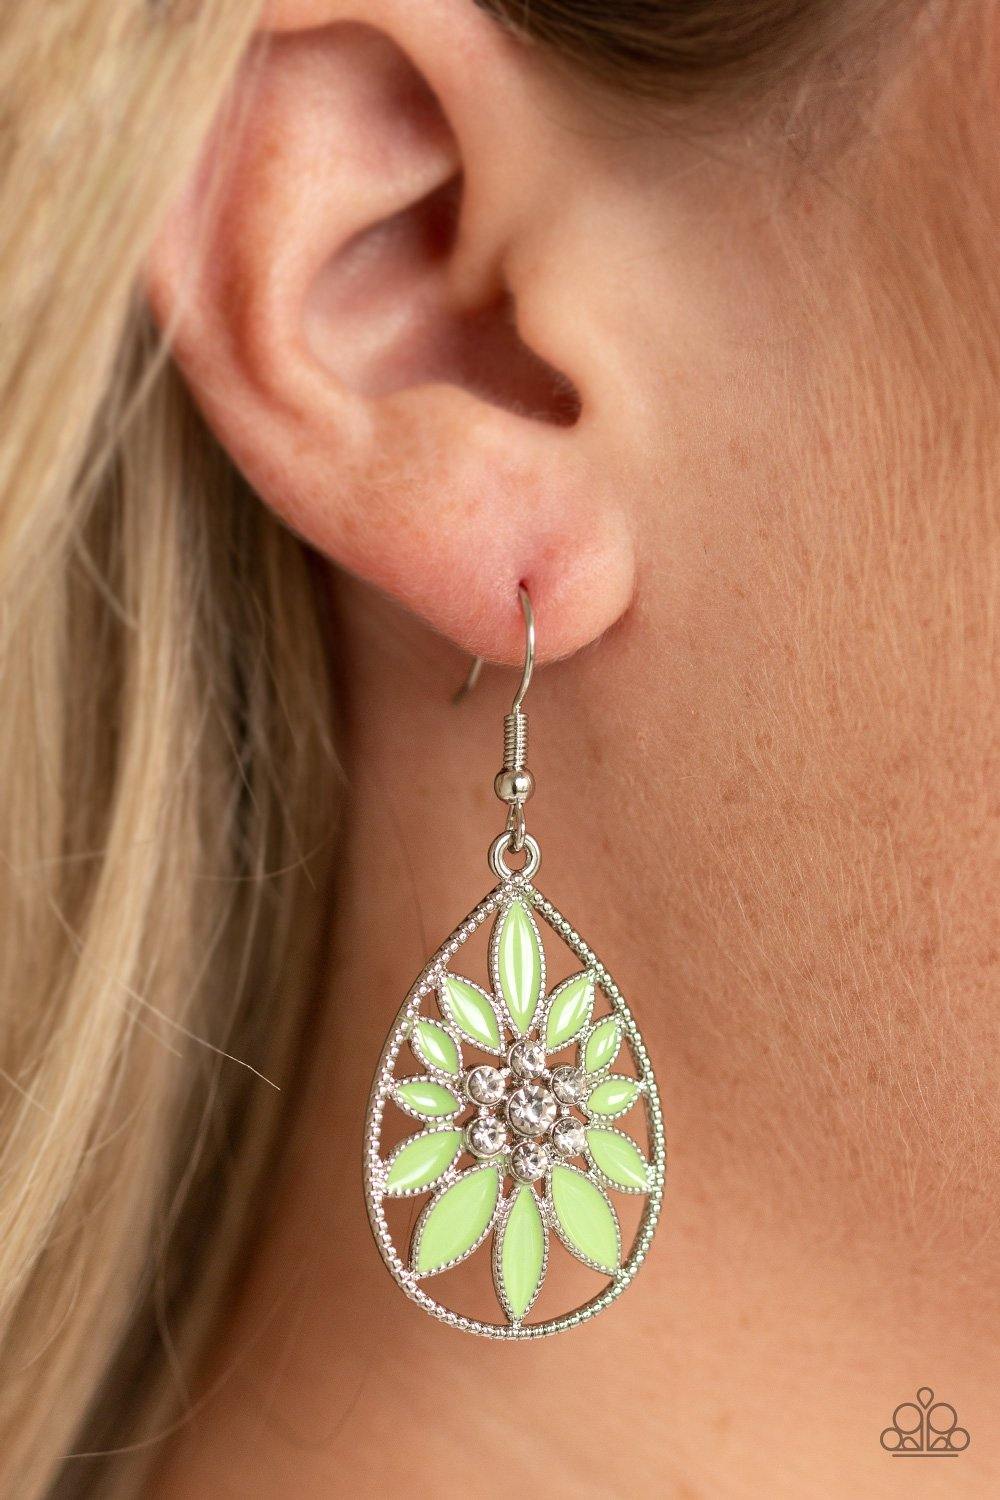 Floral Morals - Green Earrings - Paparazzi Accessories - Sassysblingandthings